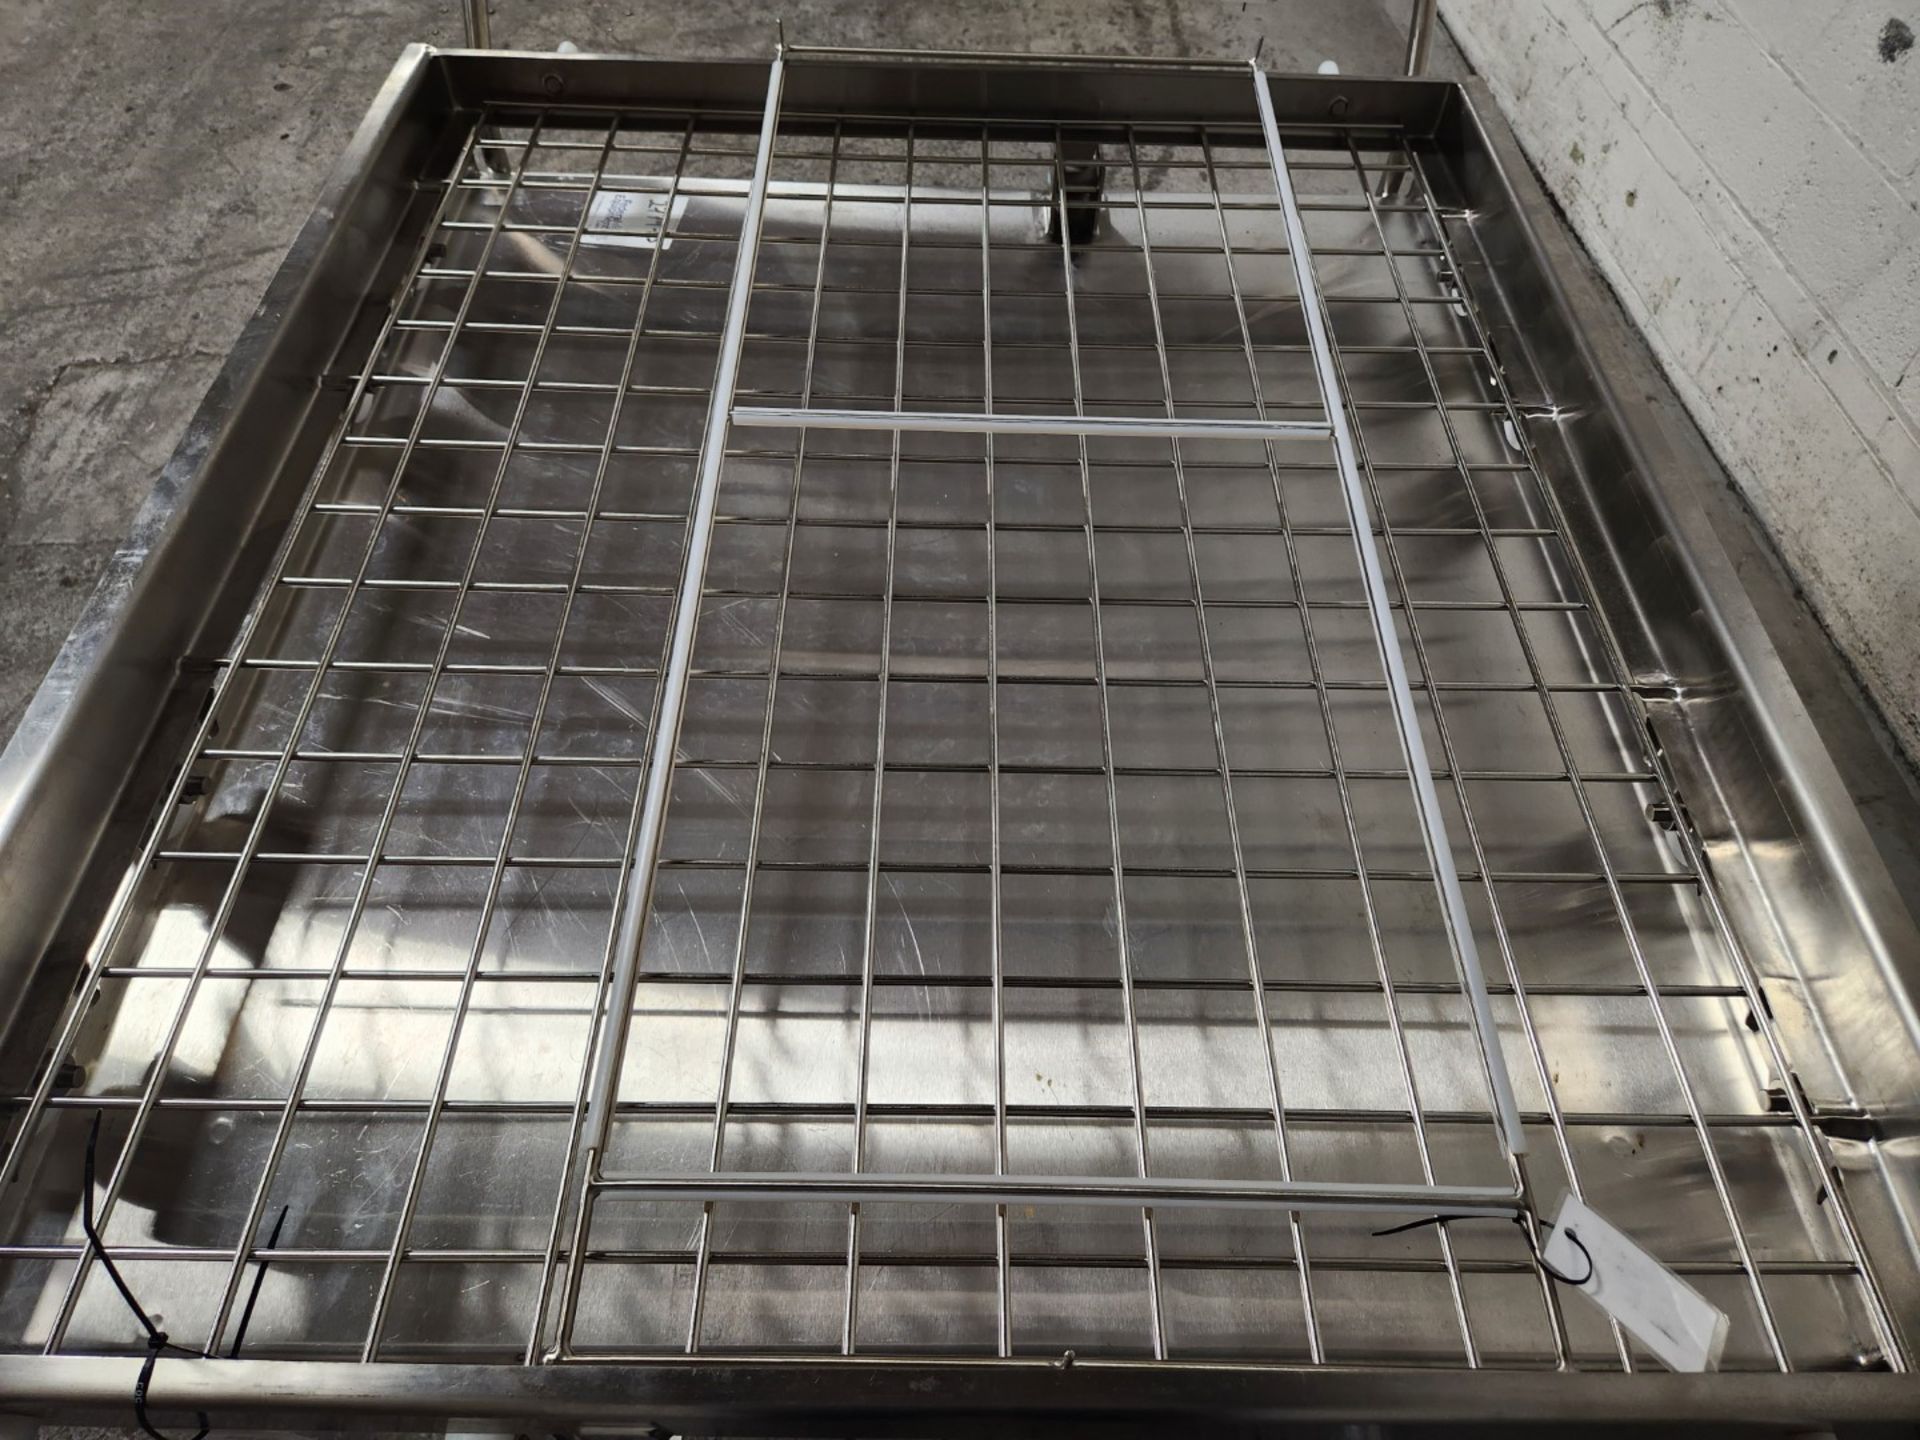 Stainless Steel Cart, with Roller Rack - Image 4 of 6